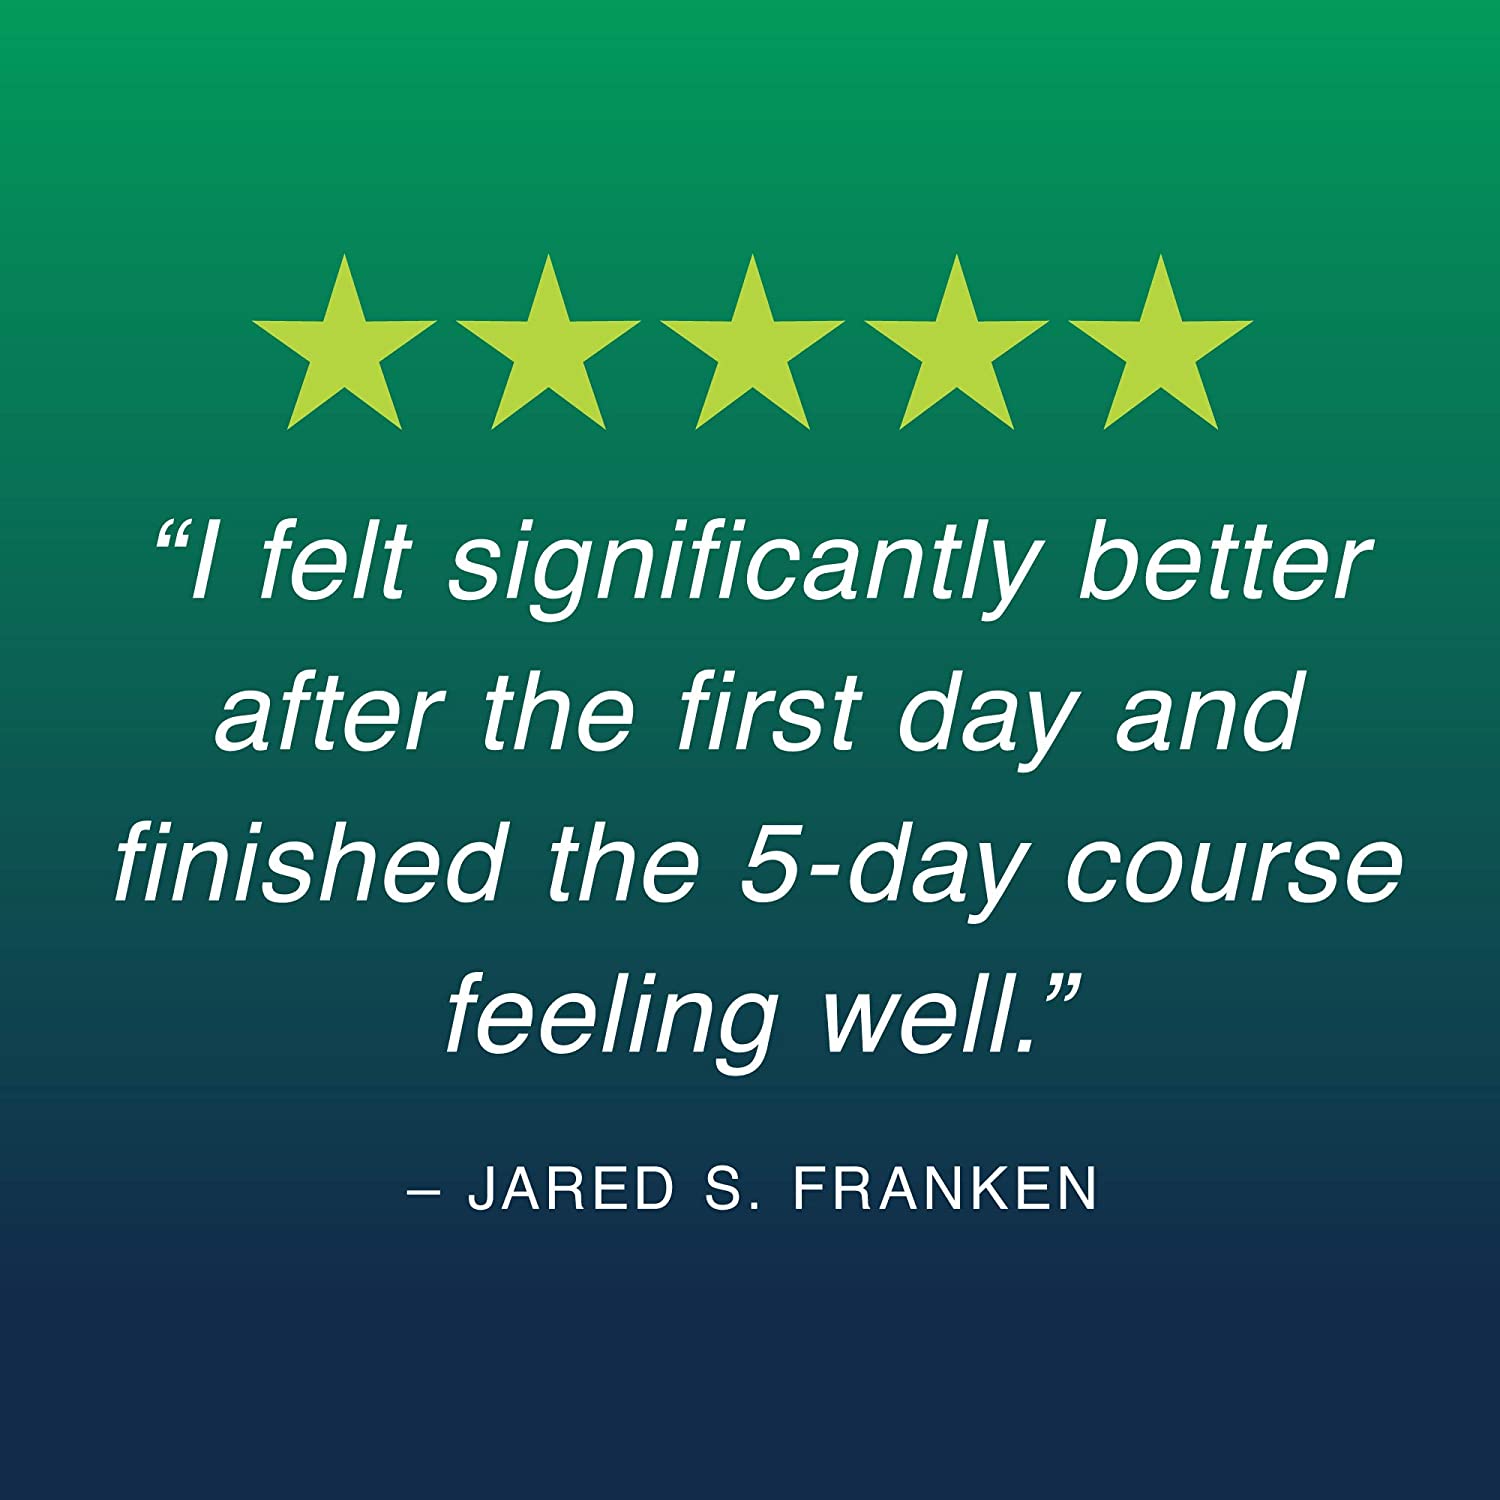 5 star EZCpak testimonial I felt significantly better after the first day and finished the 5 day course feeling well